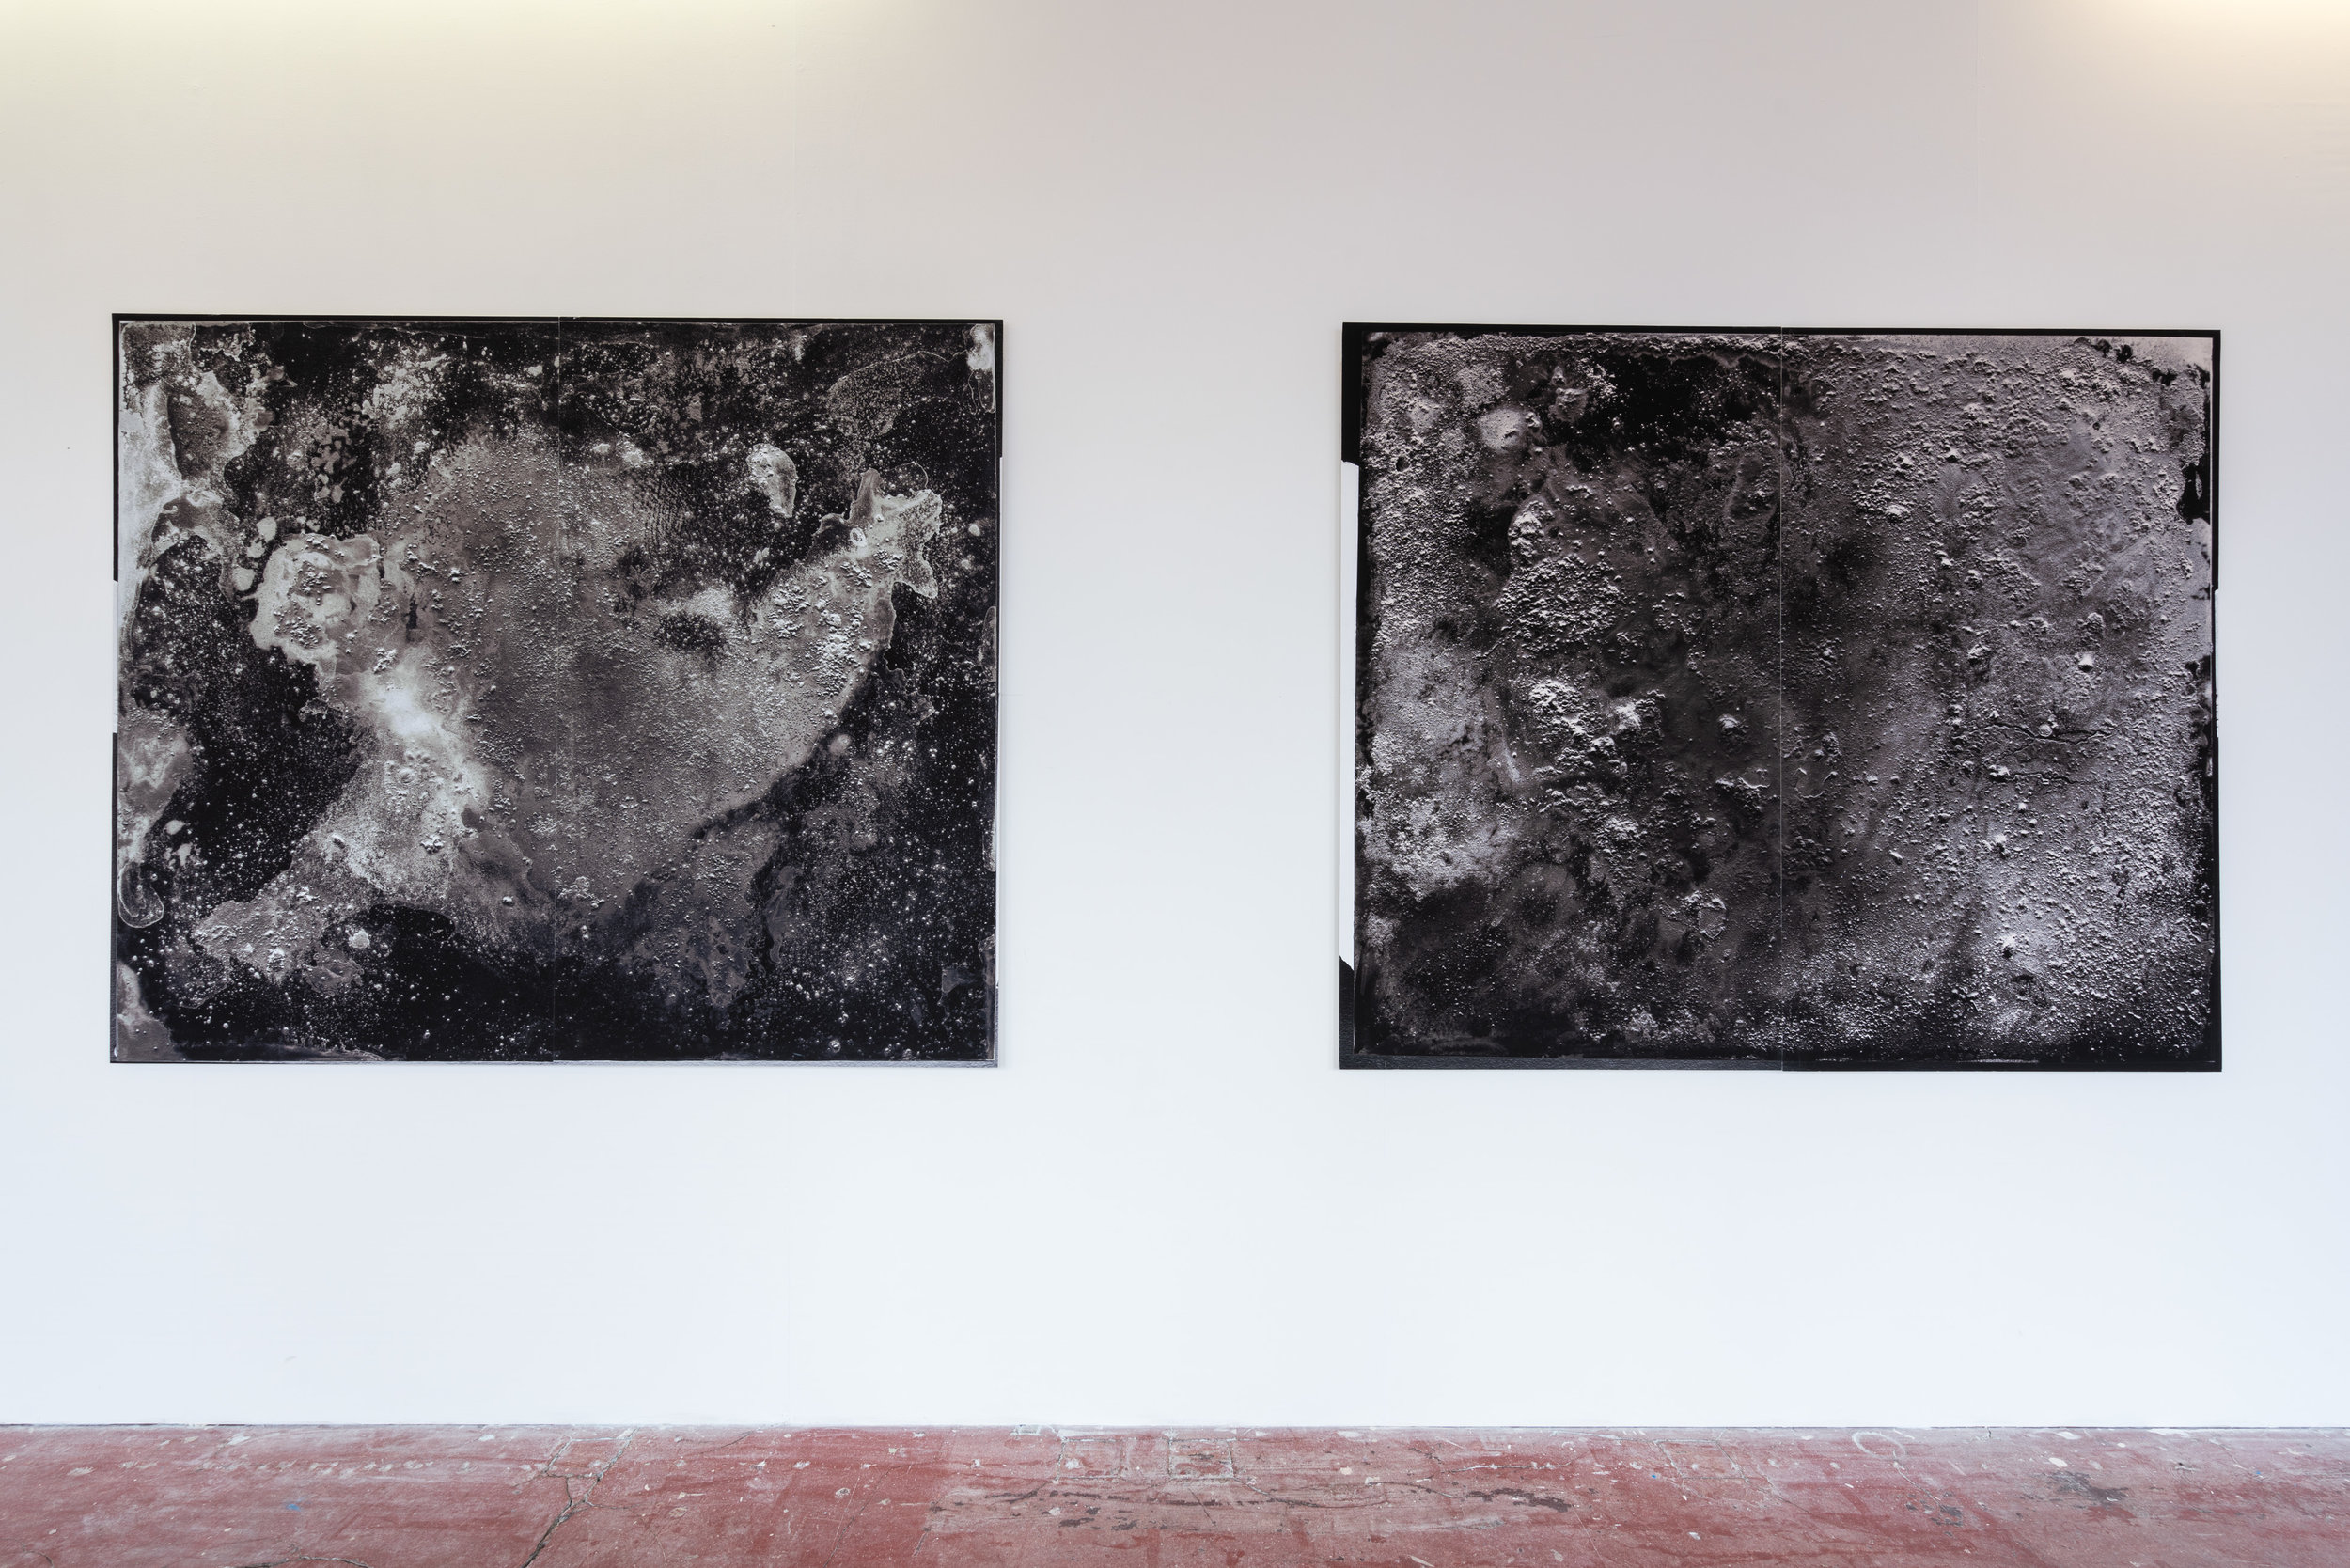 S/2016 B 6 and S/2016 B 8, installed at Backlit Gallery, Nottingham, 2019, Photo: Reece Straw